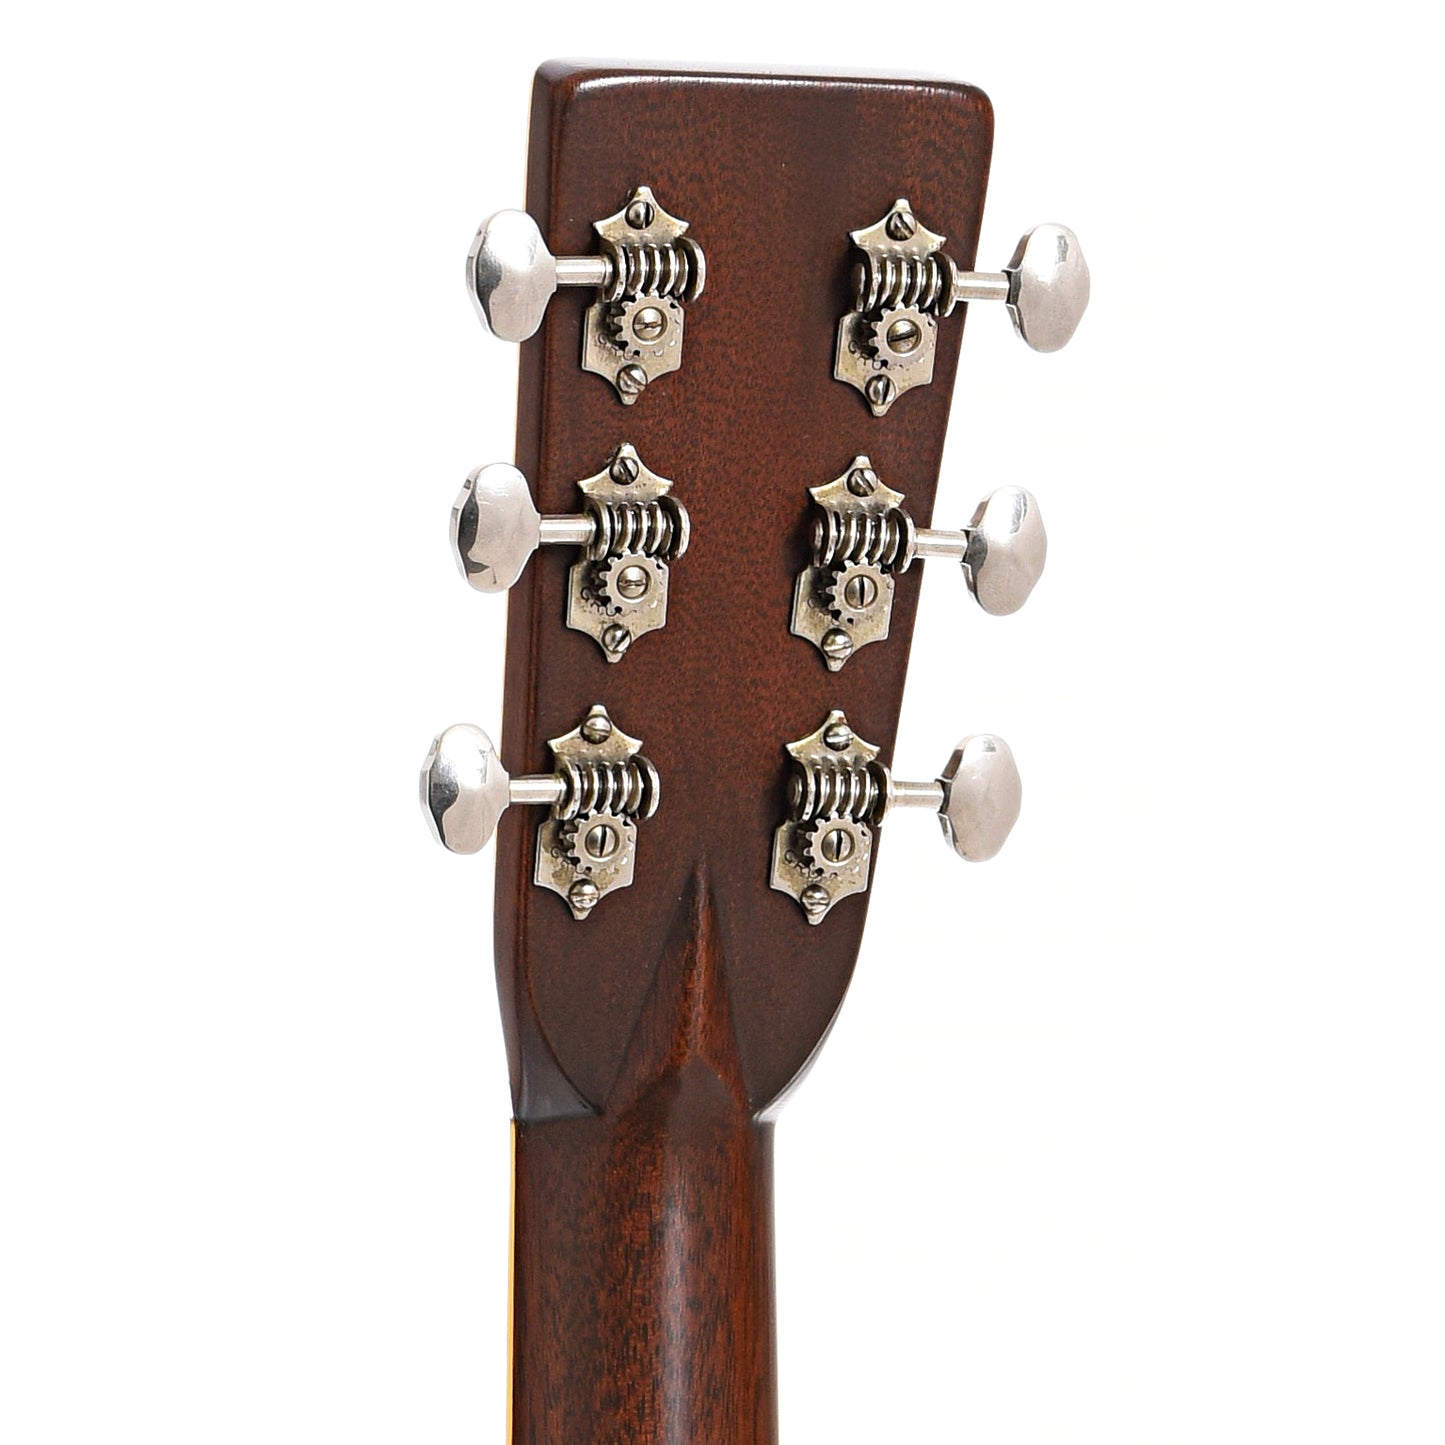 Back headstock of F-7 Archtop guitar